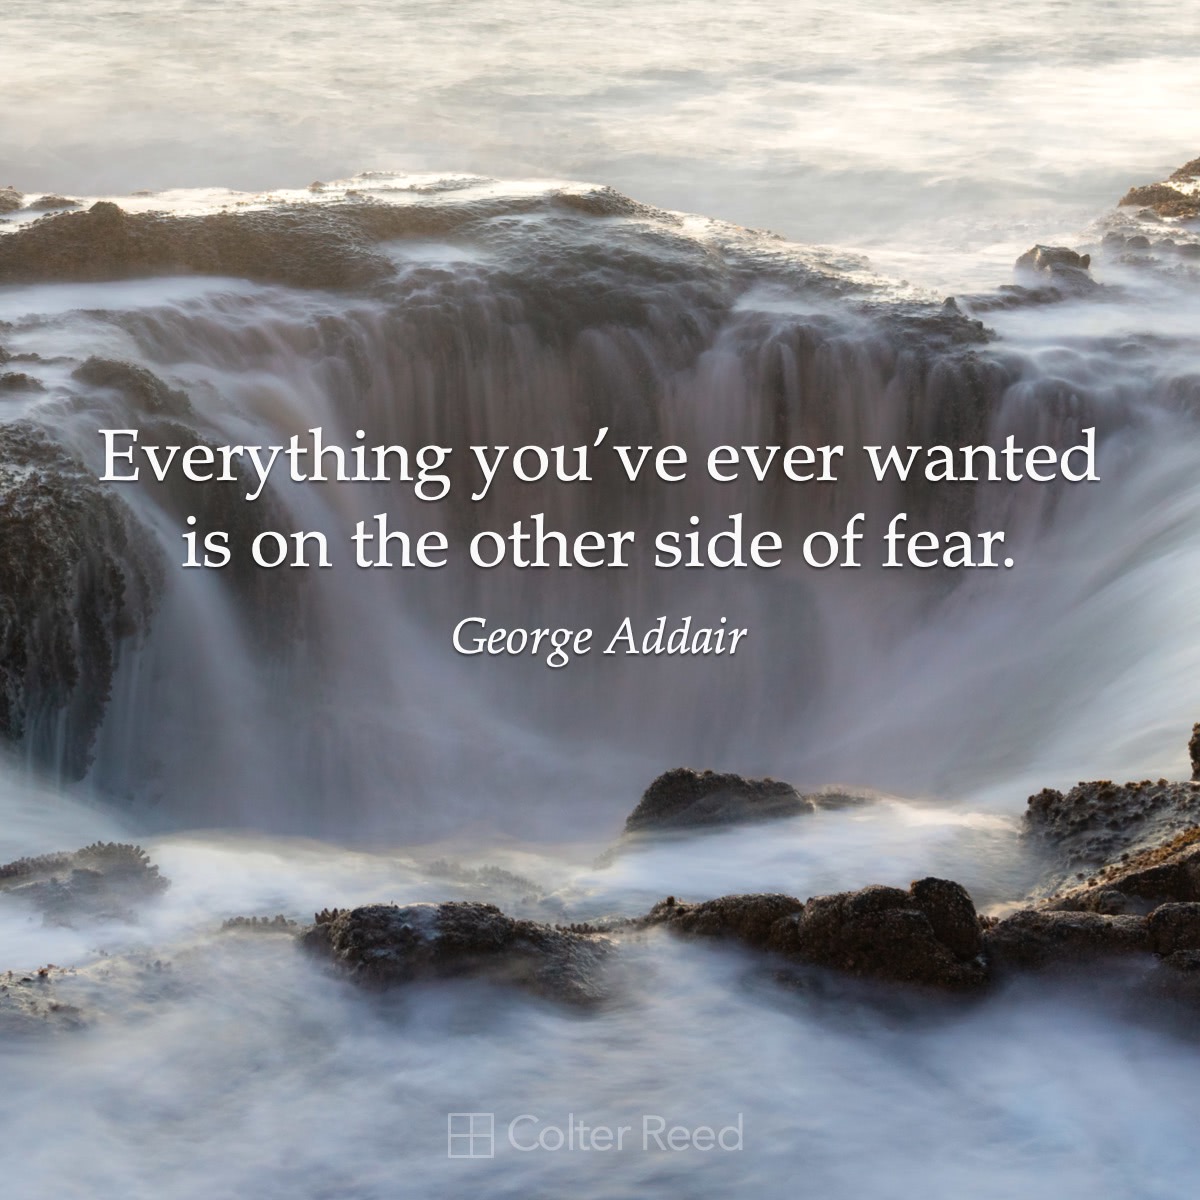 Everything you’ve ever wanted is on the other side of fear. —George Addair